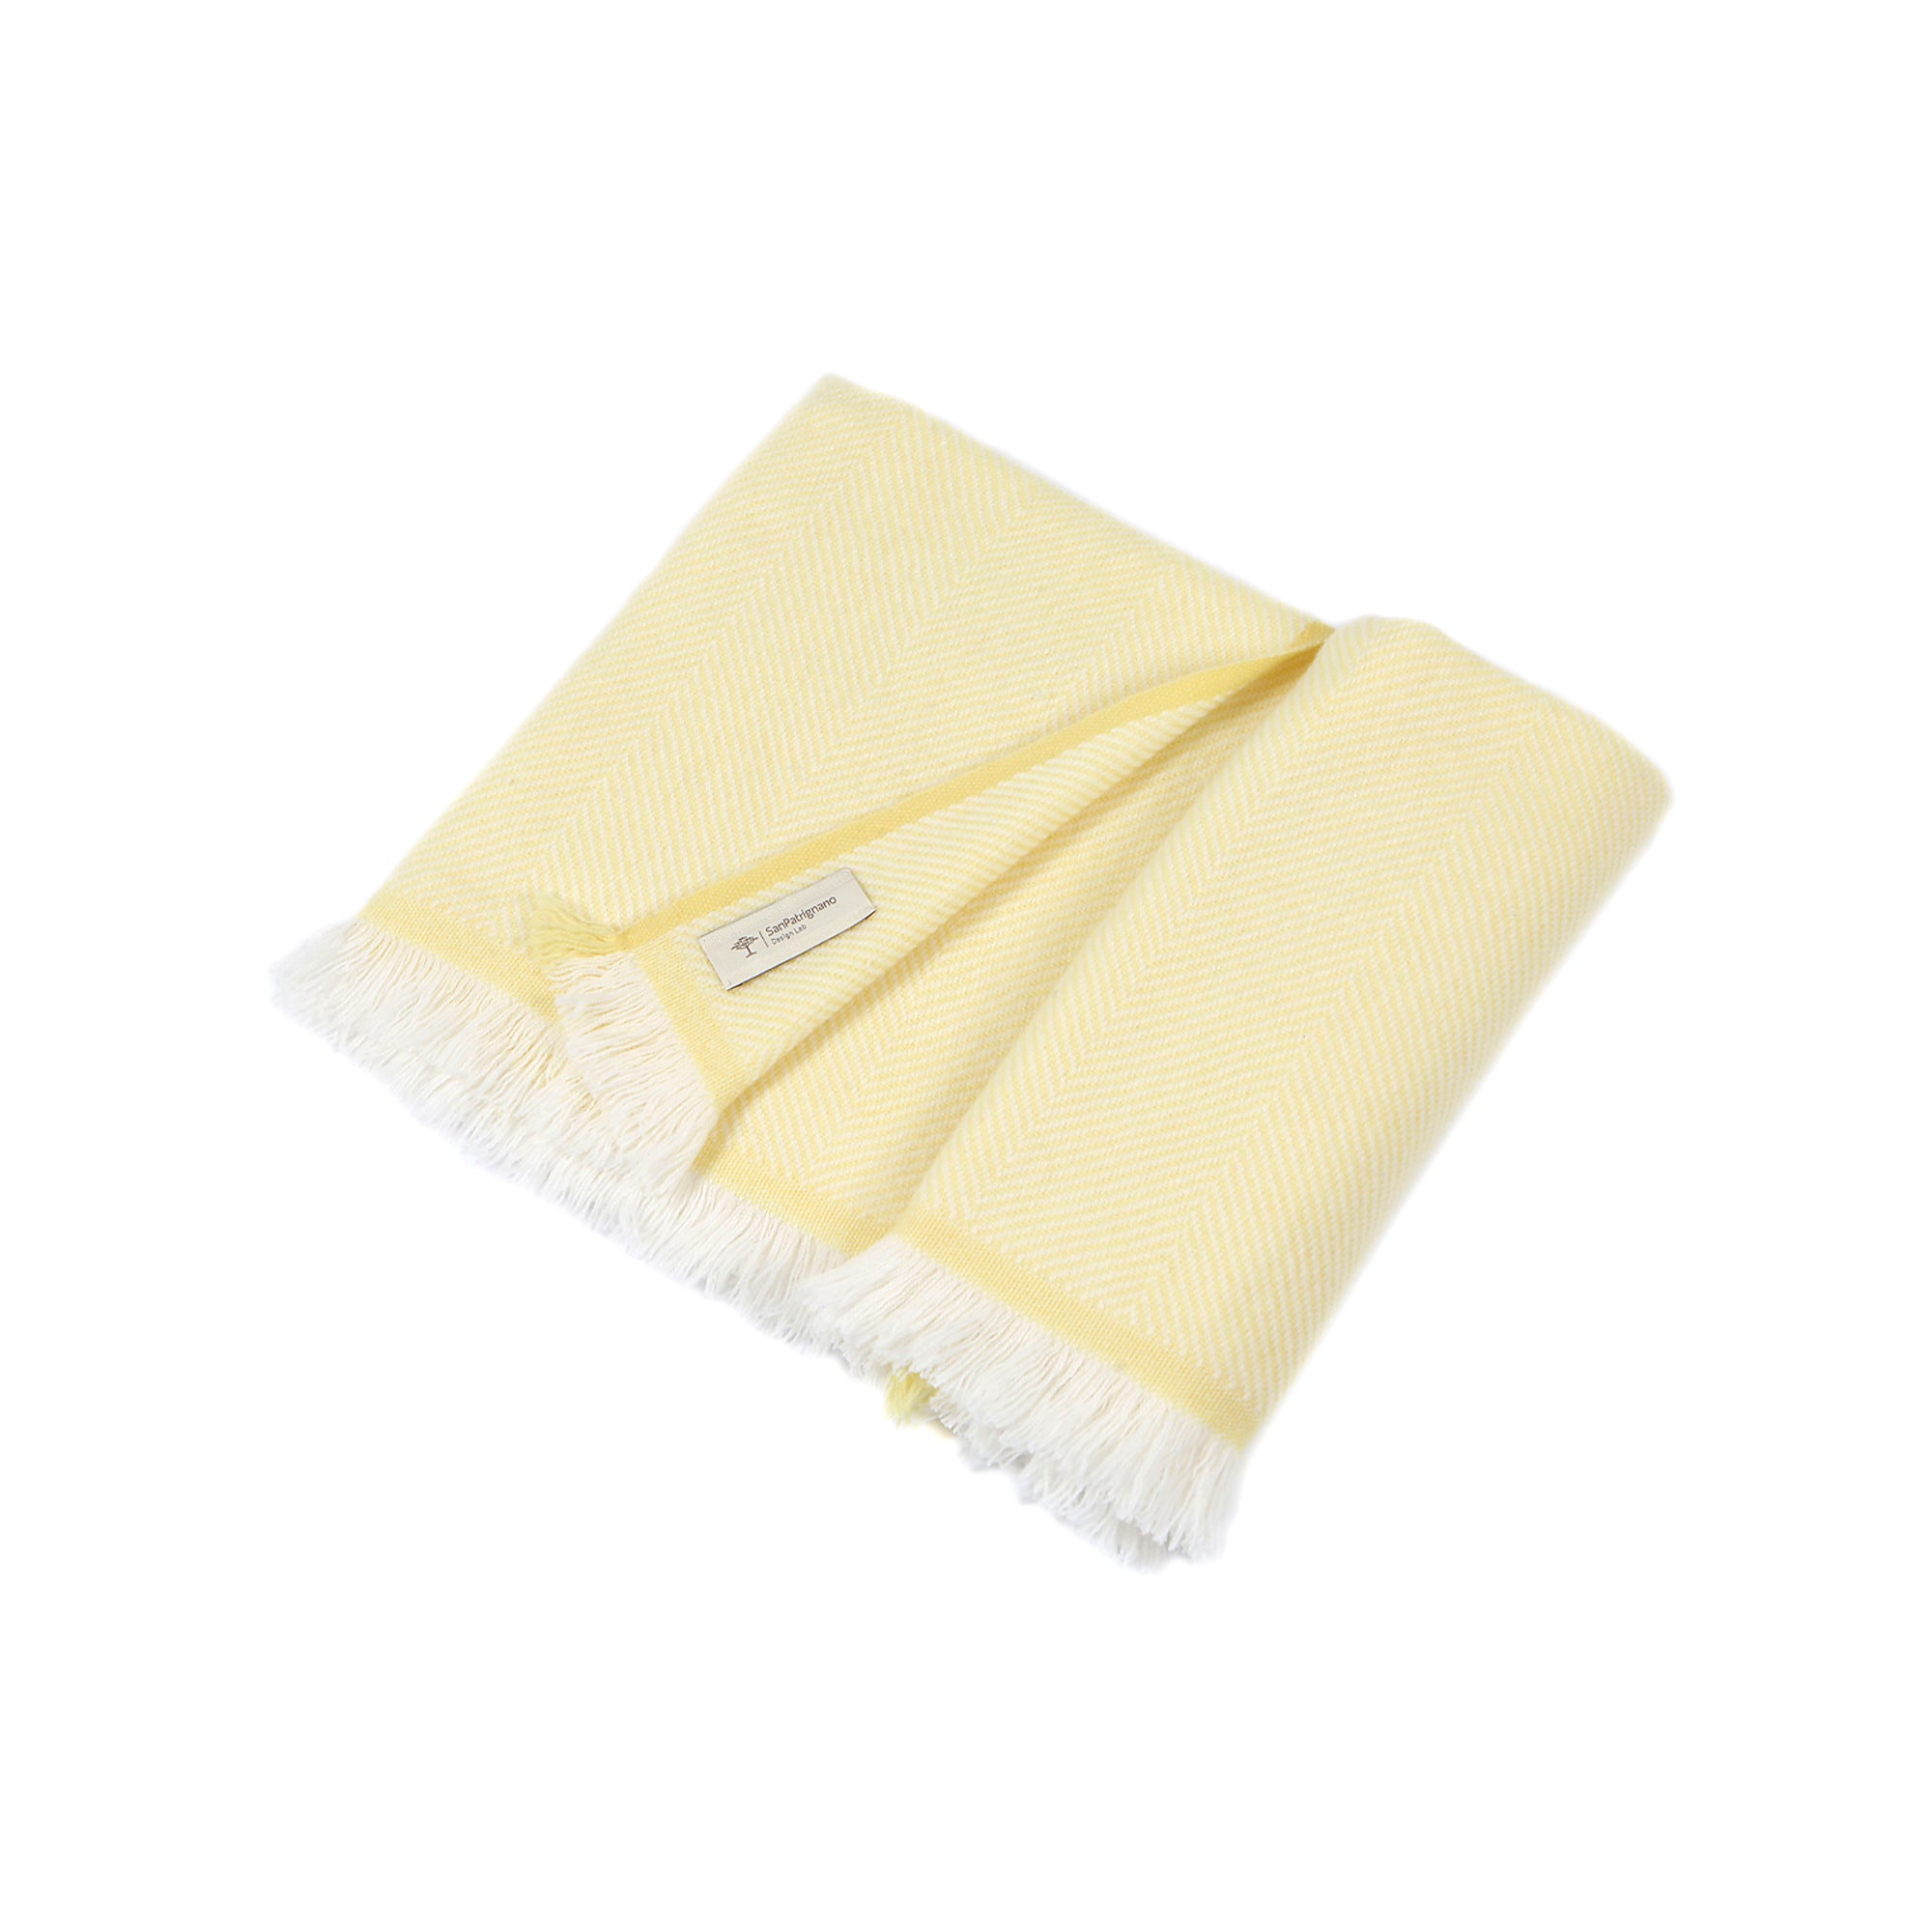 Cream and Lemon Yellow 100% Cashmere Baby Blanket with short fringes - Alternative view 1